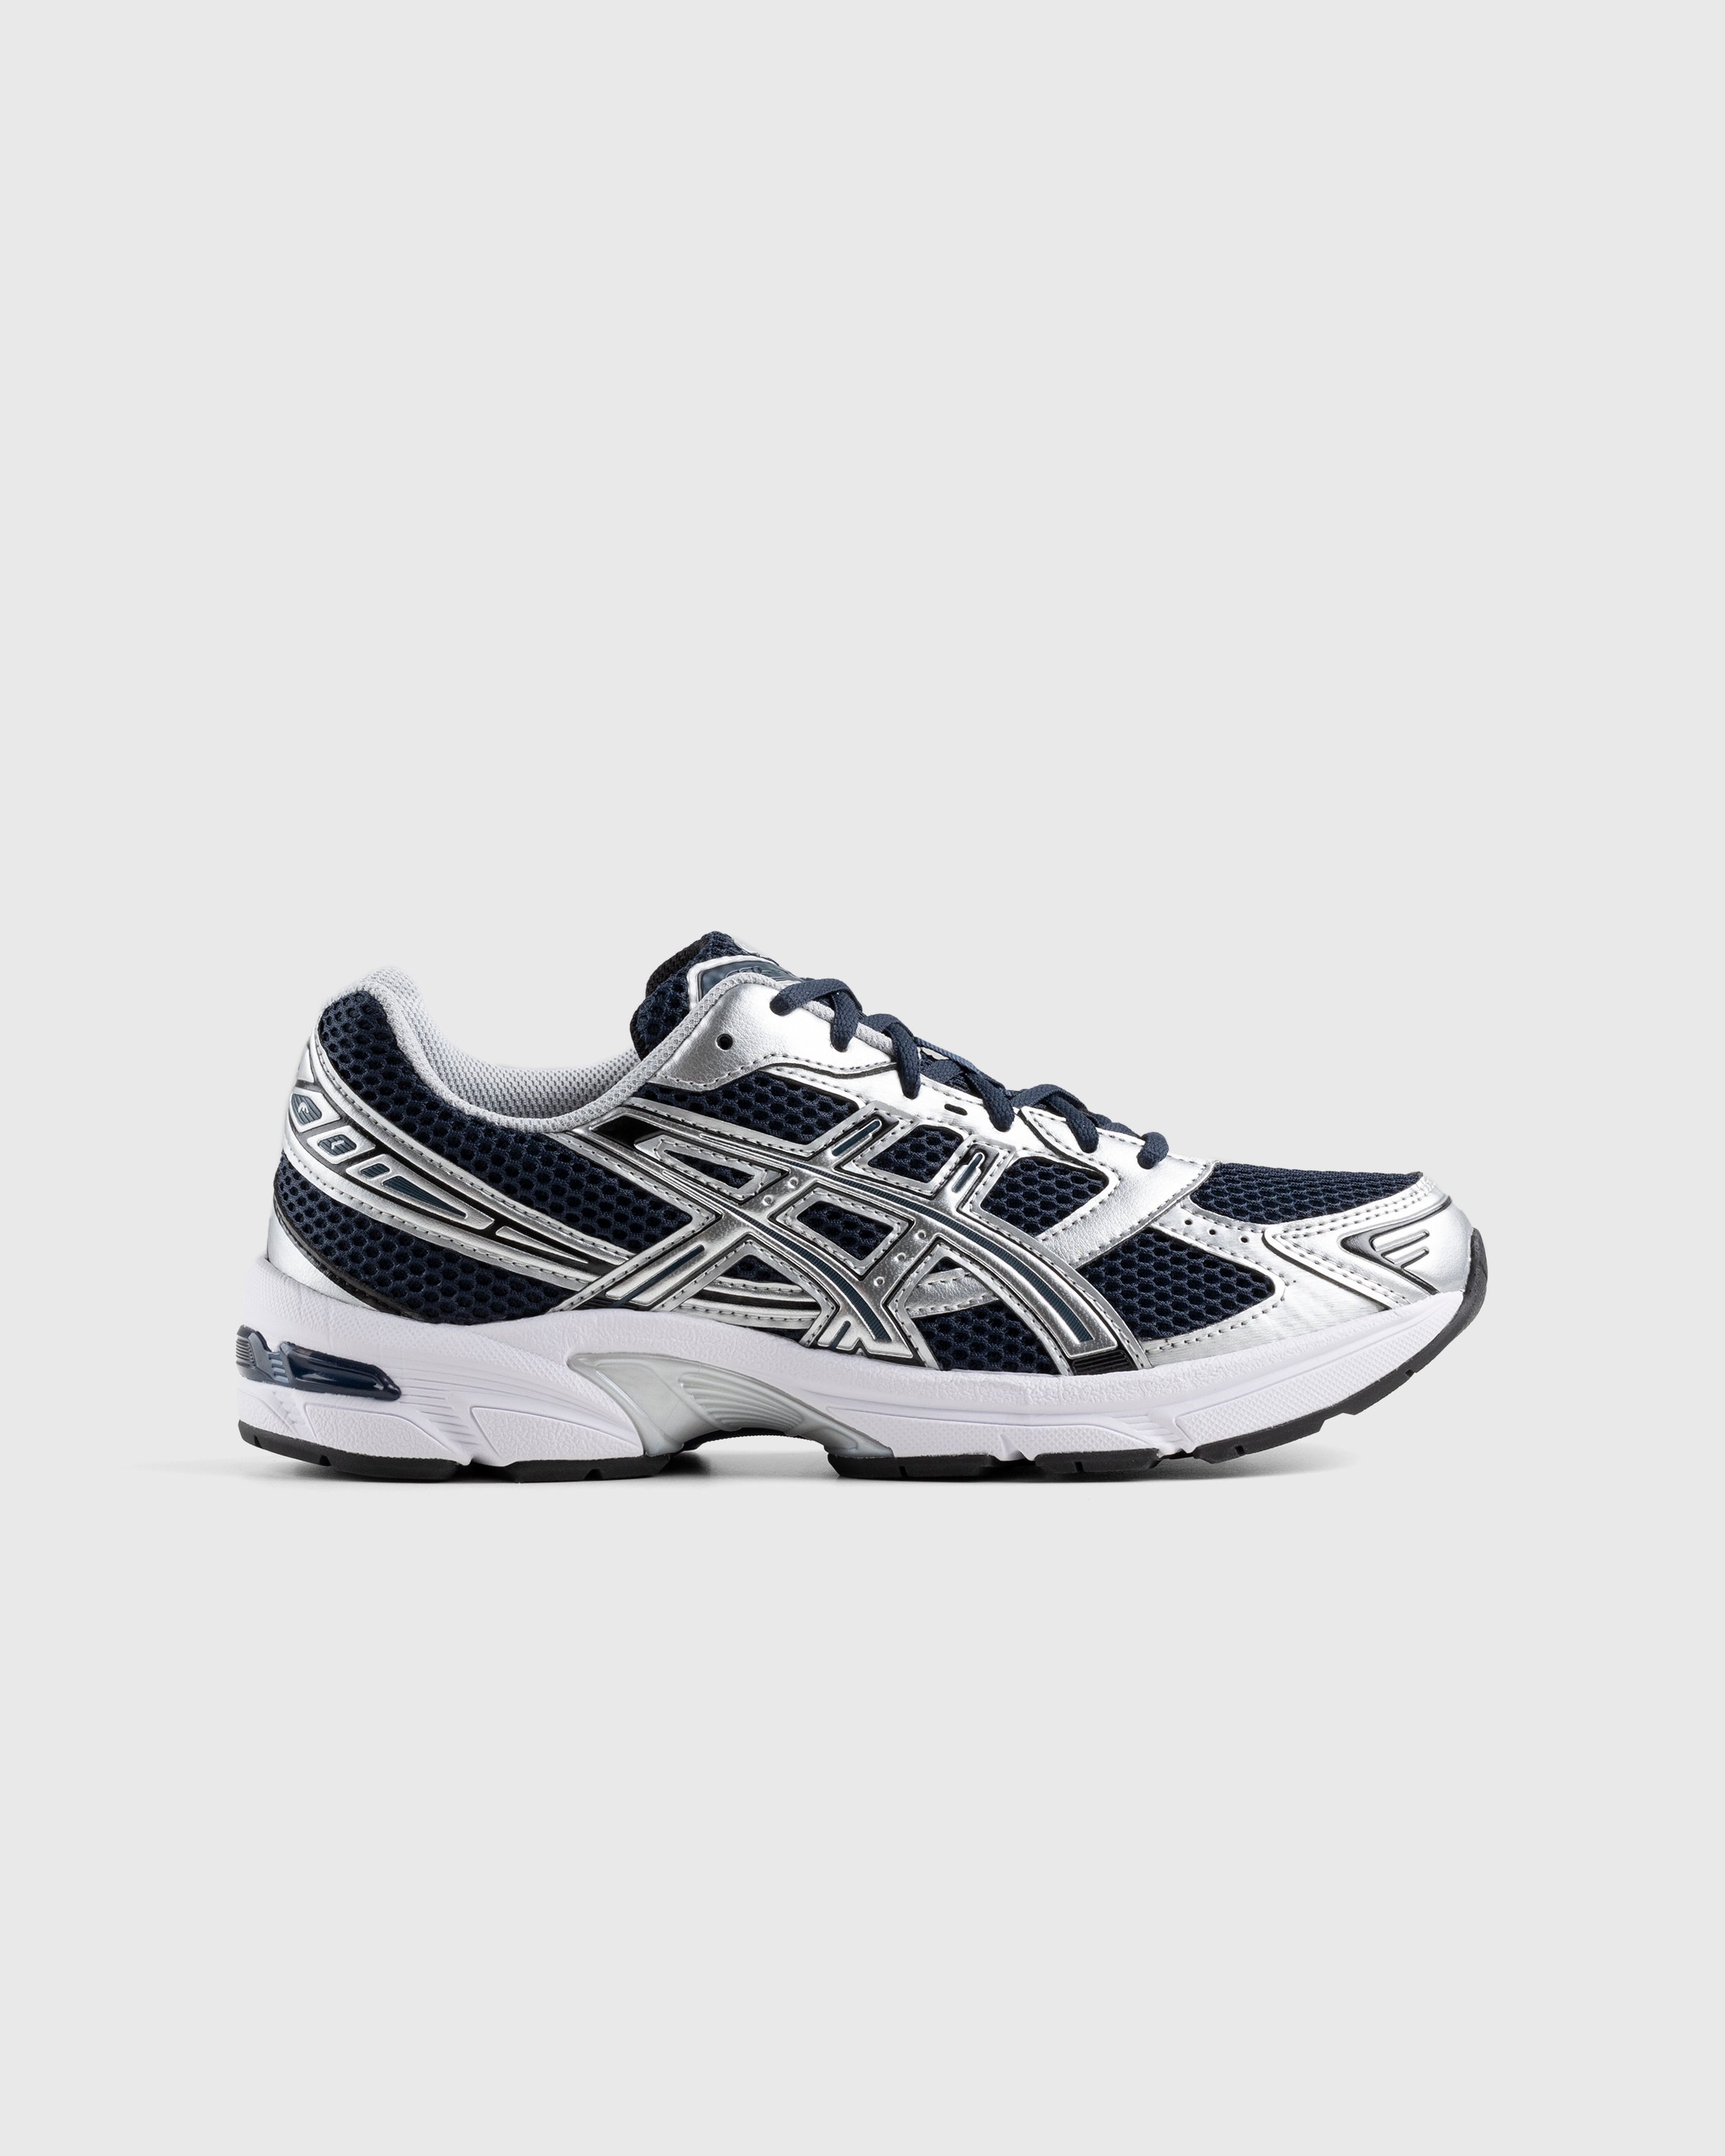 asics - GEL-1130 French Blue/Pure Silver - Footwear - Blue - Image 1